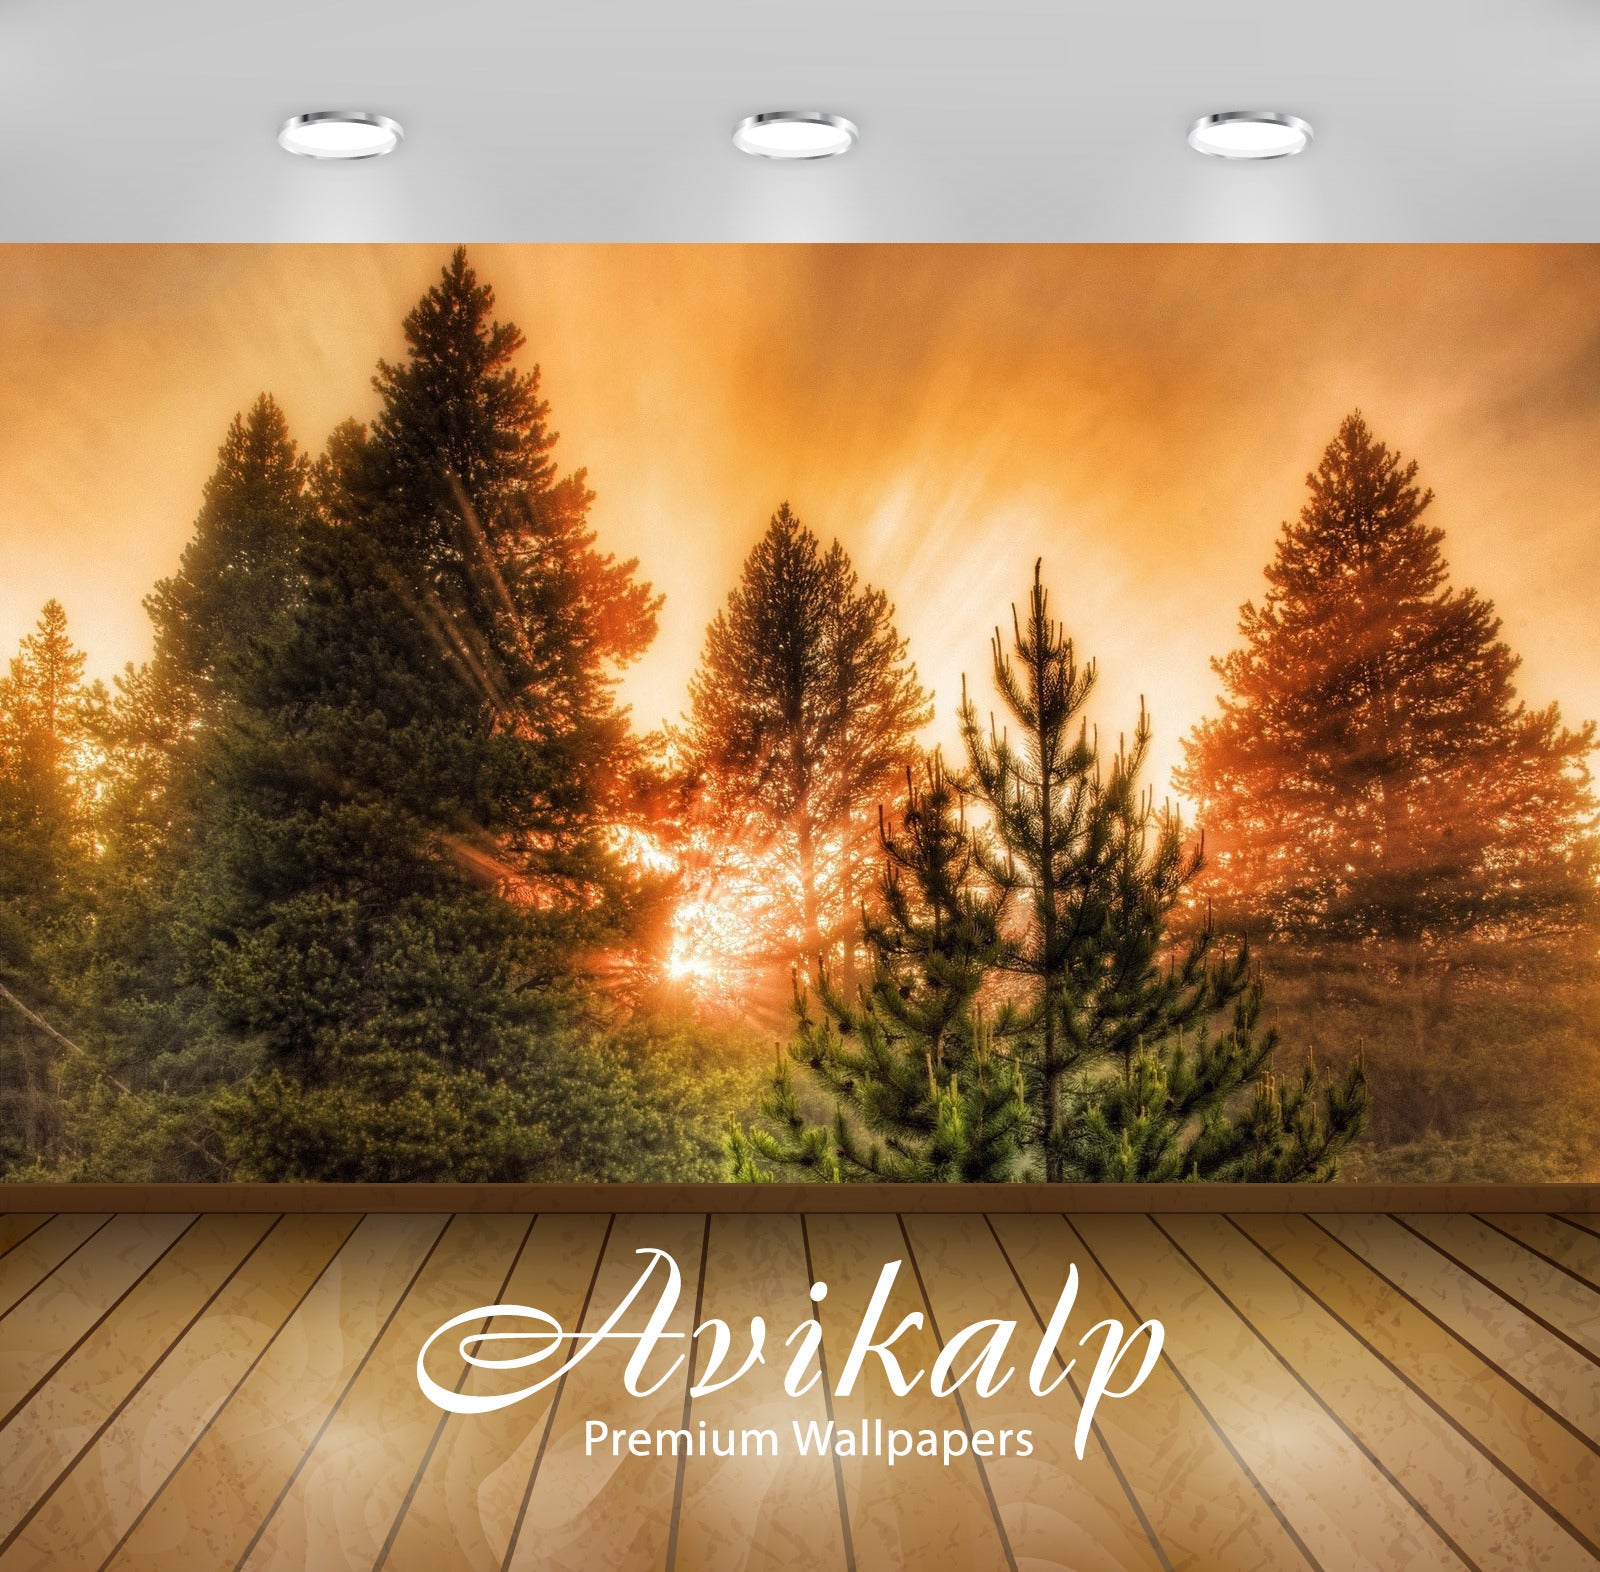 Avikalp Exclusive Awi6403 Sun Light Through Pine Trees Nature Full HD Wallpapers for Living room, Ha